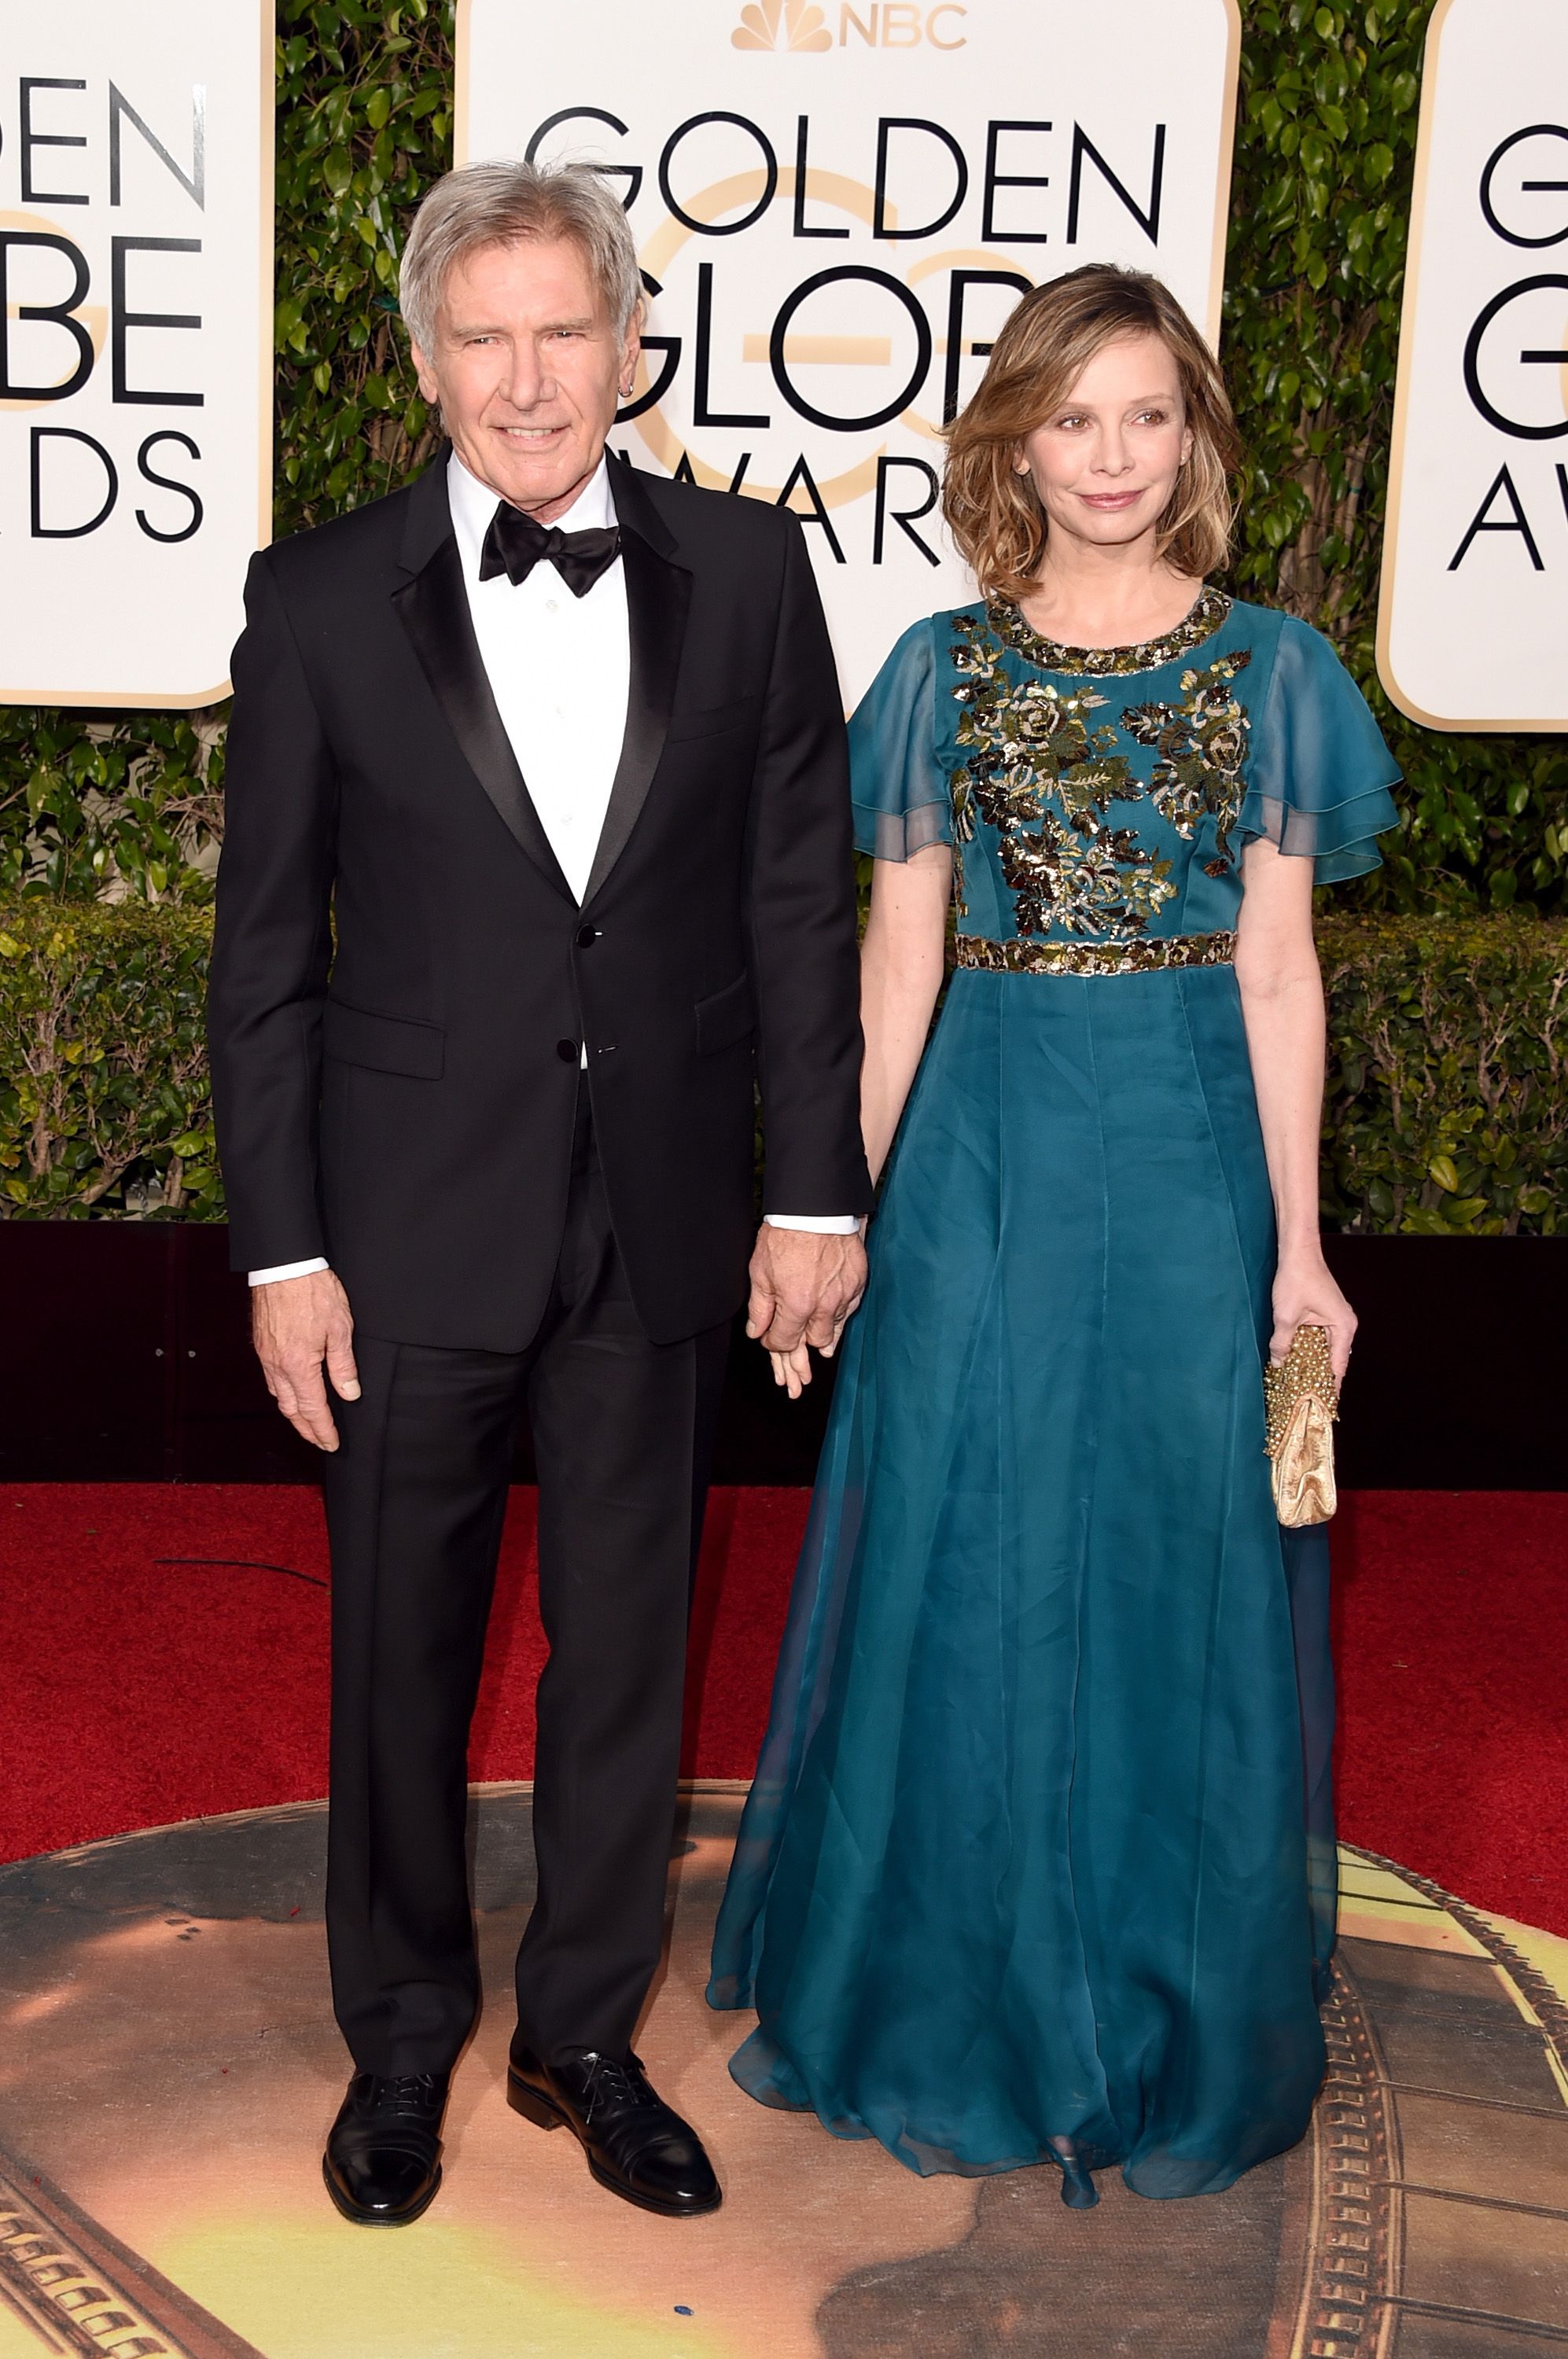 Harrison Ford and Calista Flockhart attend the 2016 Golden Globe Awards.